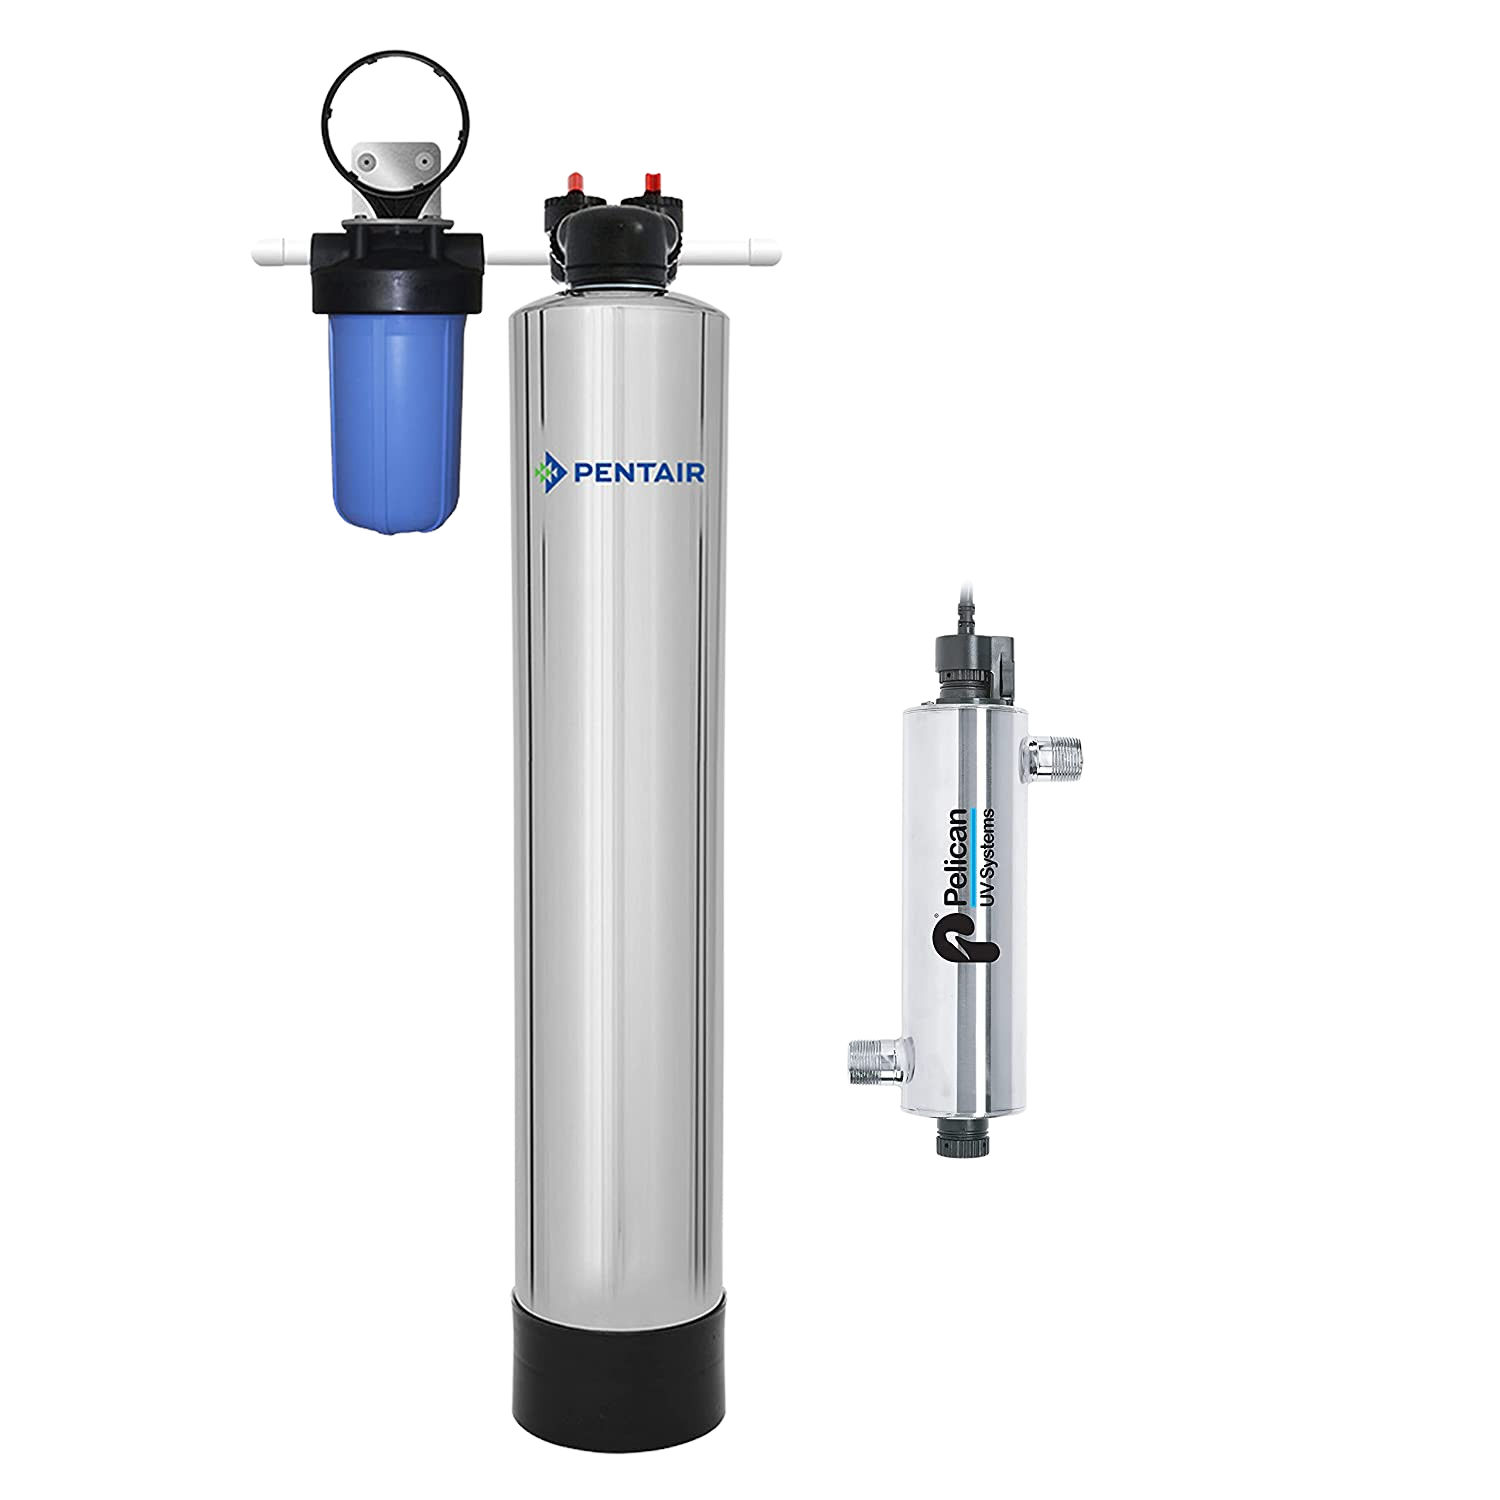 Pentair Pelican PC1000-PUV-14-P Whole House Water Filter New